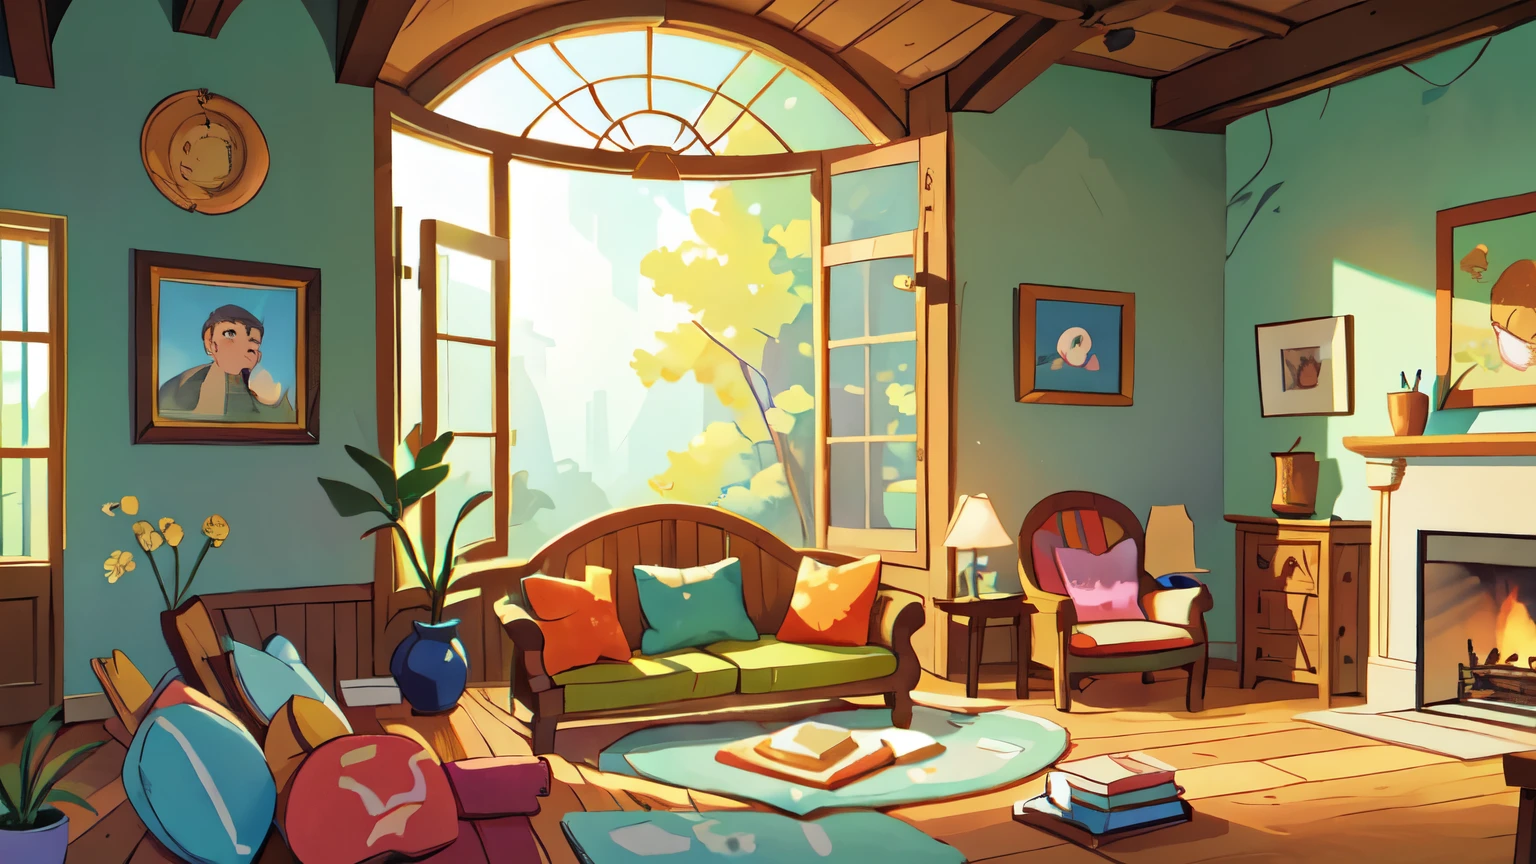 ((bright cartoon background)) of a Living room inside, from the inside, brightly lit, sun rays shining through the windows, forest outside, arched wooden door with patterns, arched passage, semicircular ceiling, fabulous paving stone floor, walls partly made of wood, many flowers inside, the room is woven with homemade flowers, antique sofas, armchairs, windows in the ceiling, sunlight shining through the windows, a semicircular wooden door, a cabinet with pottery and dishes with Khokhlama painting, paintings hanging on the walls, a fireplace near one of the walls.